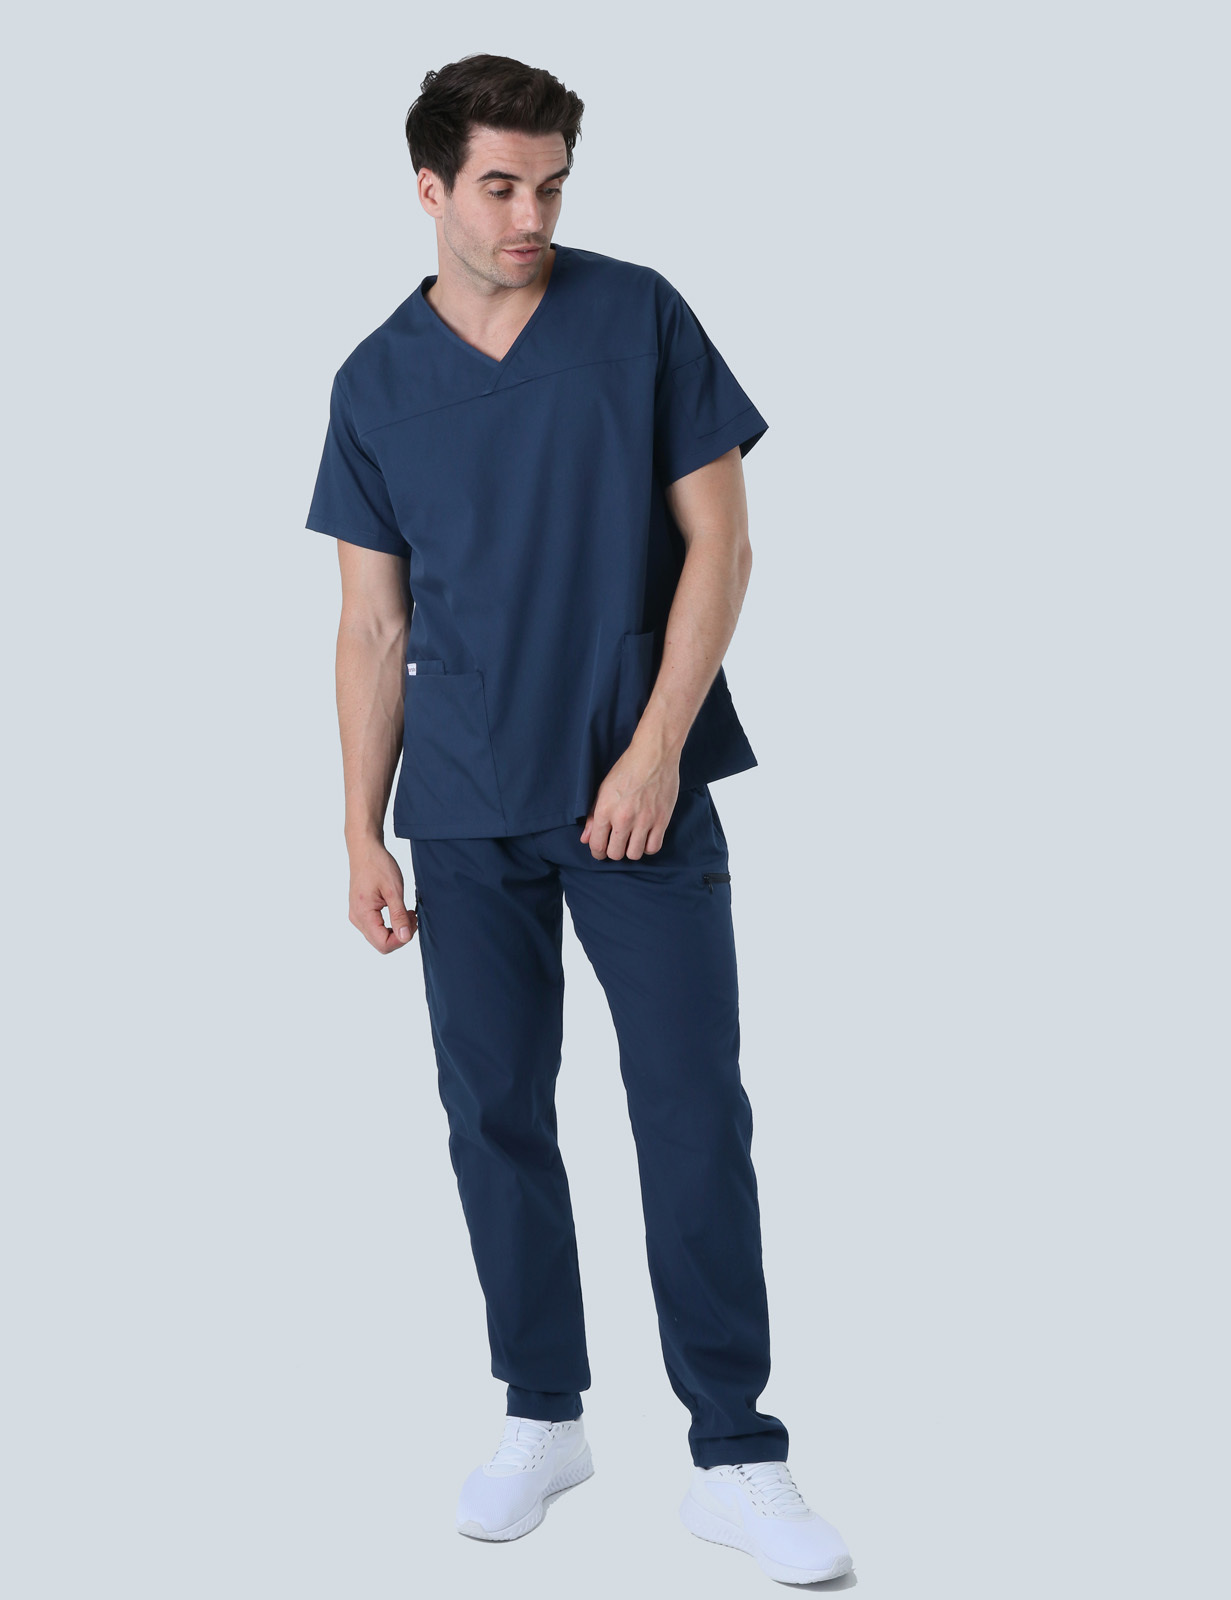 Men's Fit Solid Scrub Top - Navy - Large